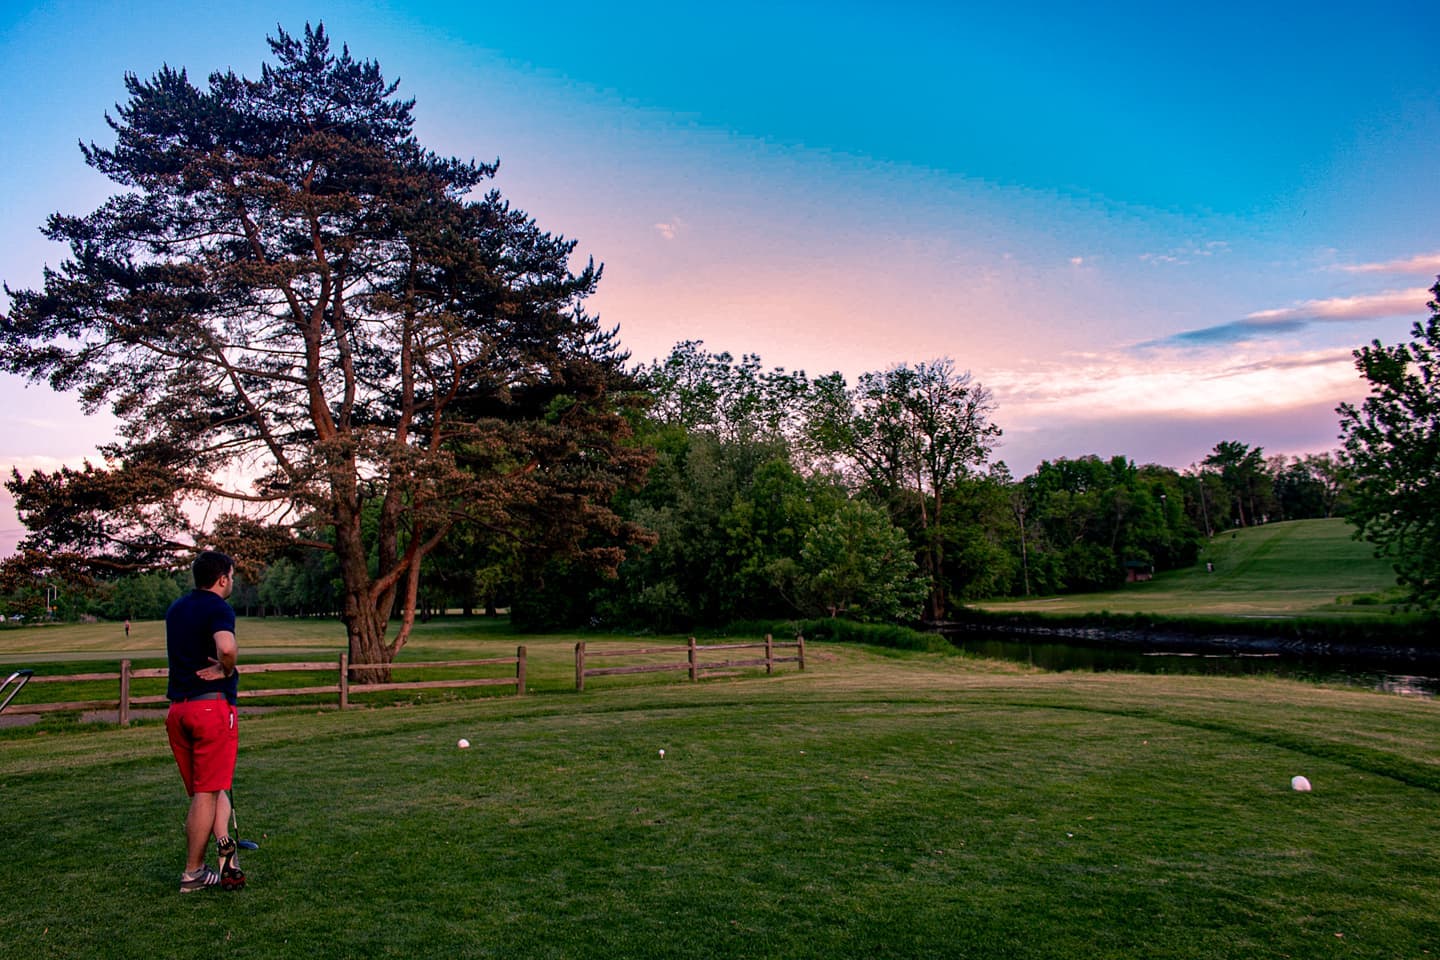 Golfer overlooking sunset at Currie Park Golf Course in Wauwatosa